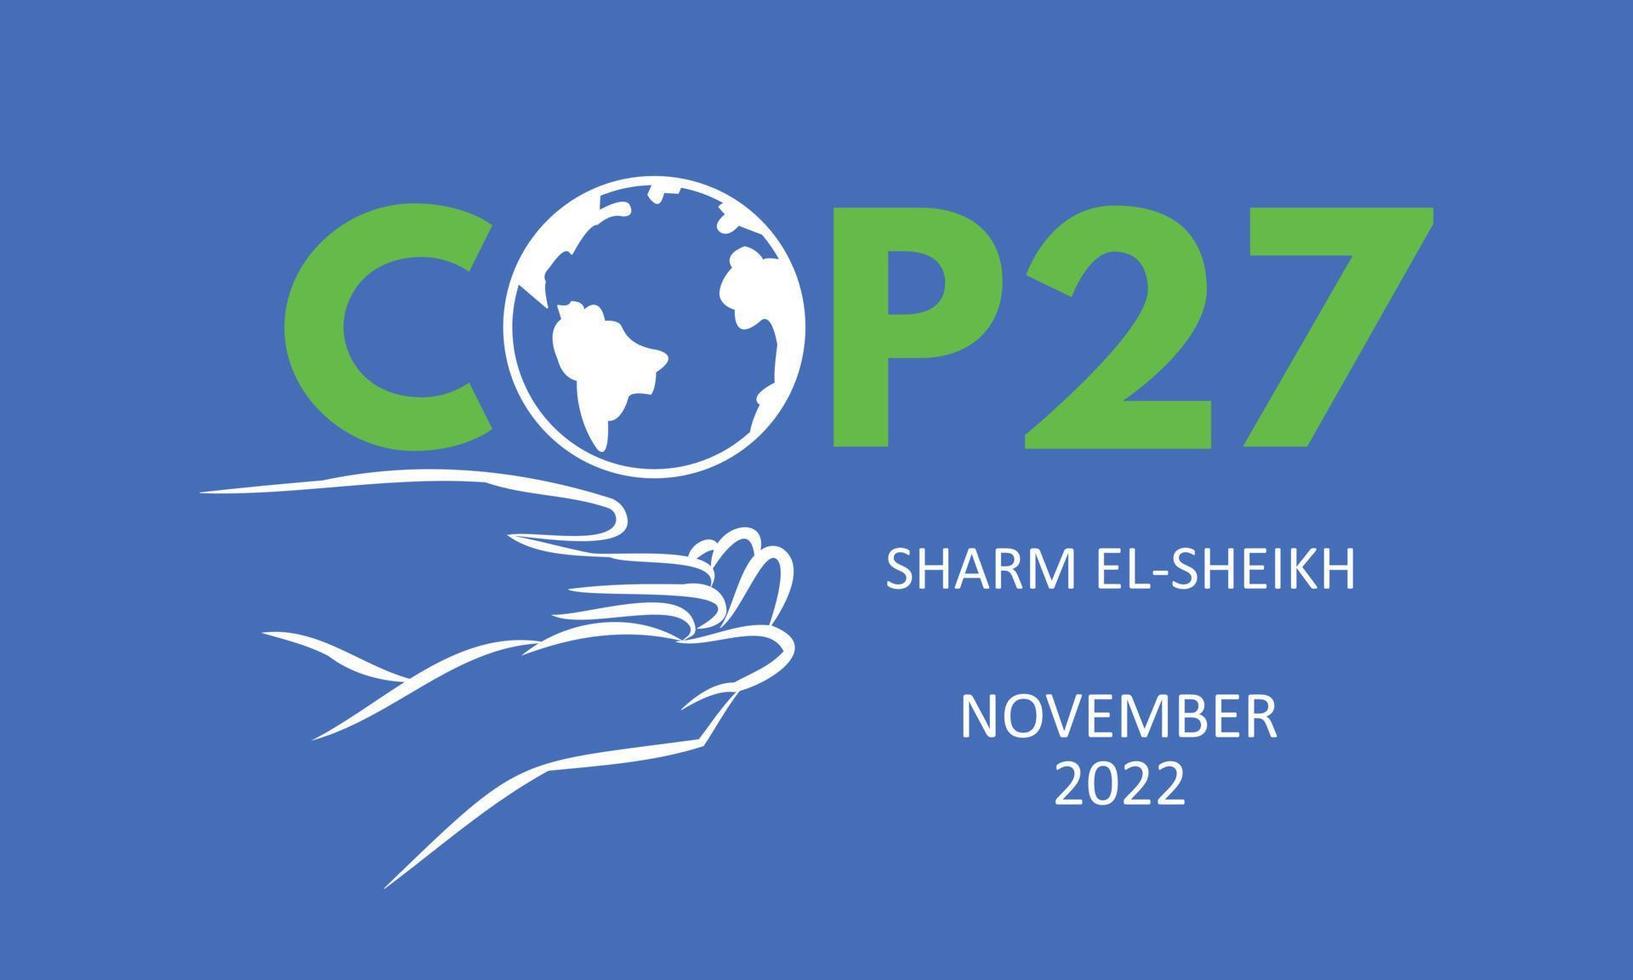 Namibia expresses happiness over COP27 outcomes Image